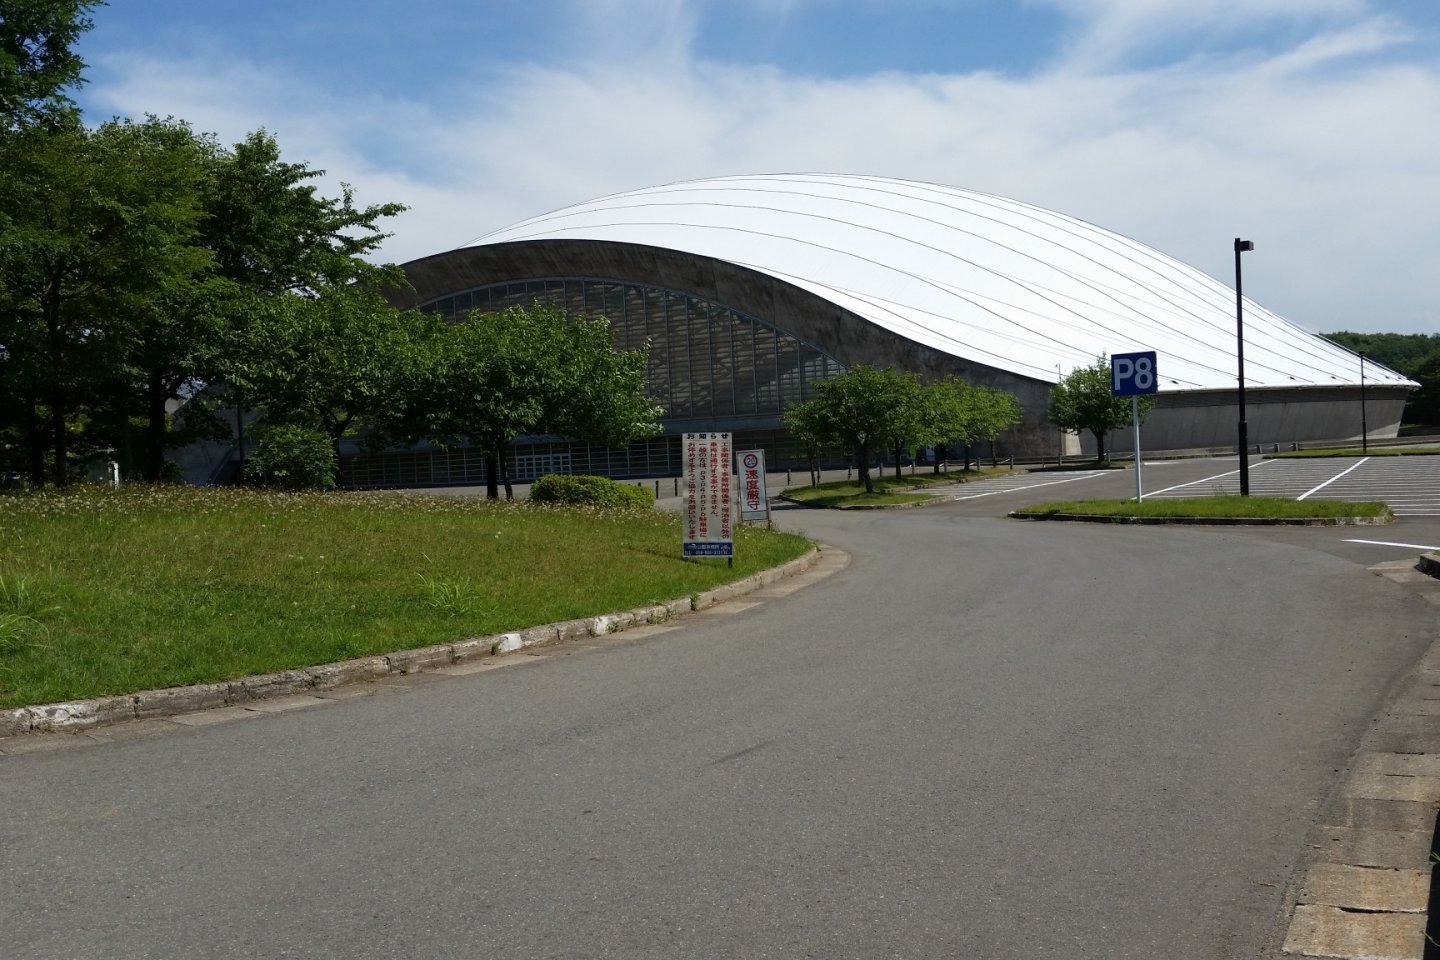 The Akita Sky Dome pops out of the greenery like a giant heap of unmelted snow, with a floor was upgraded in 2015 with new artificial turf after a period of dirt